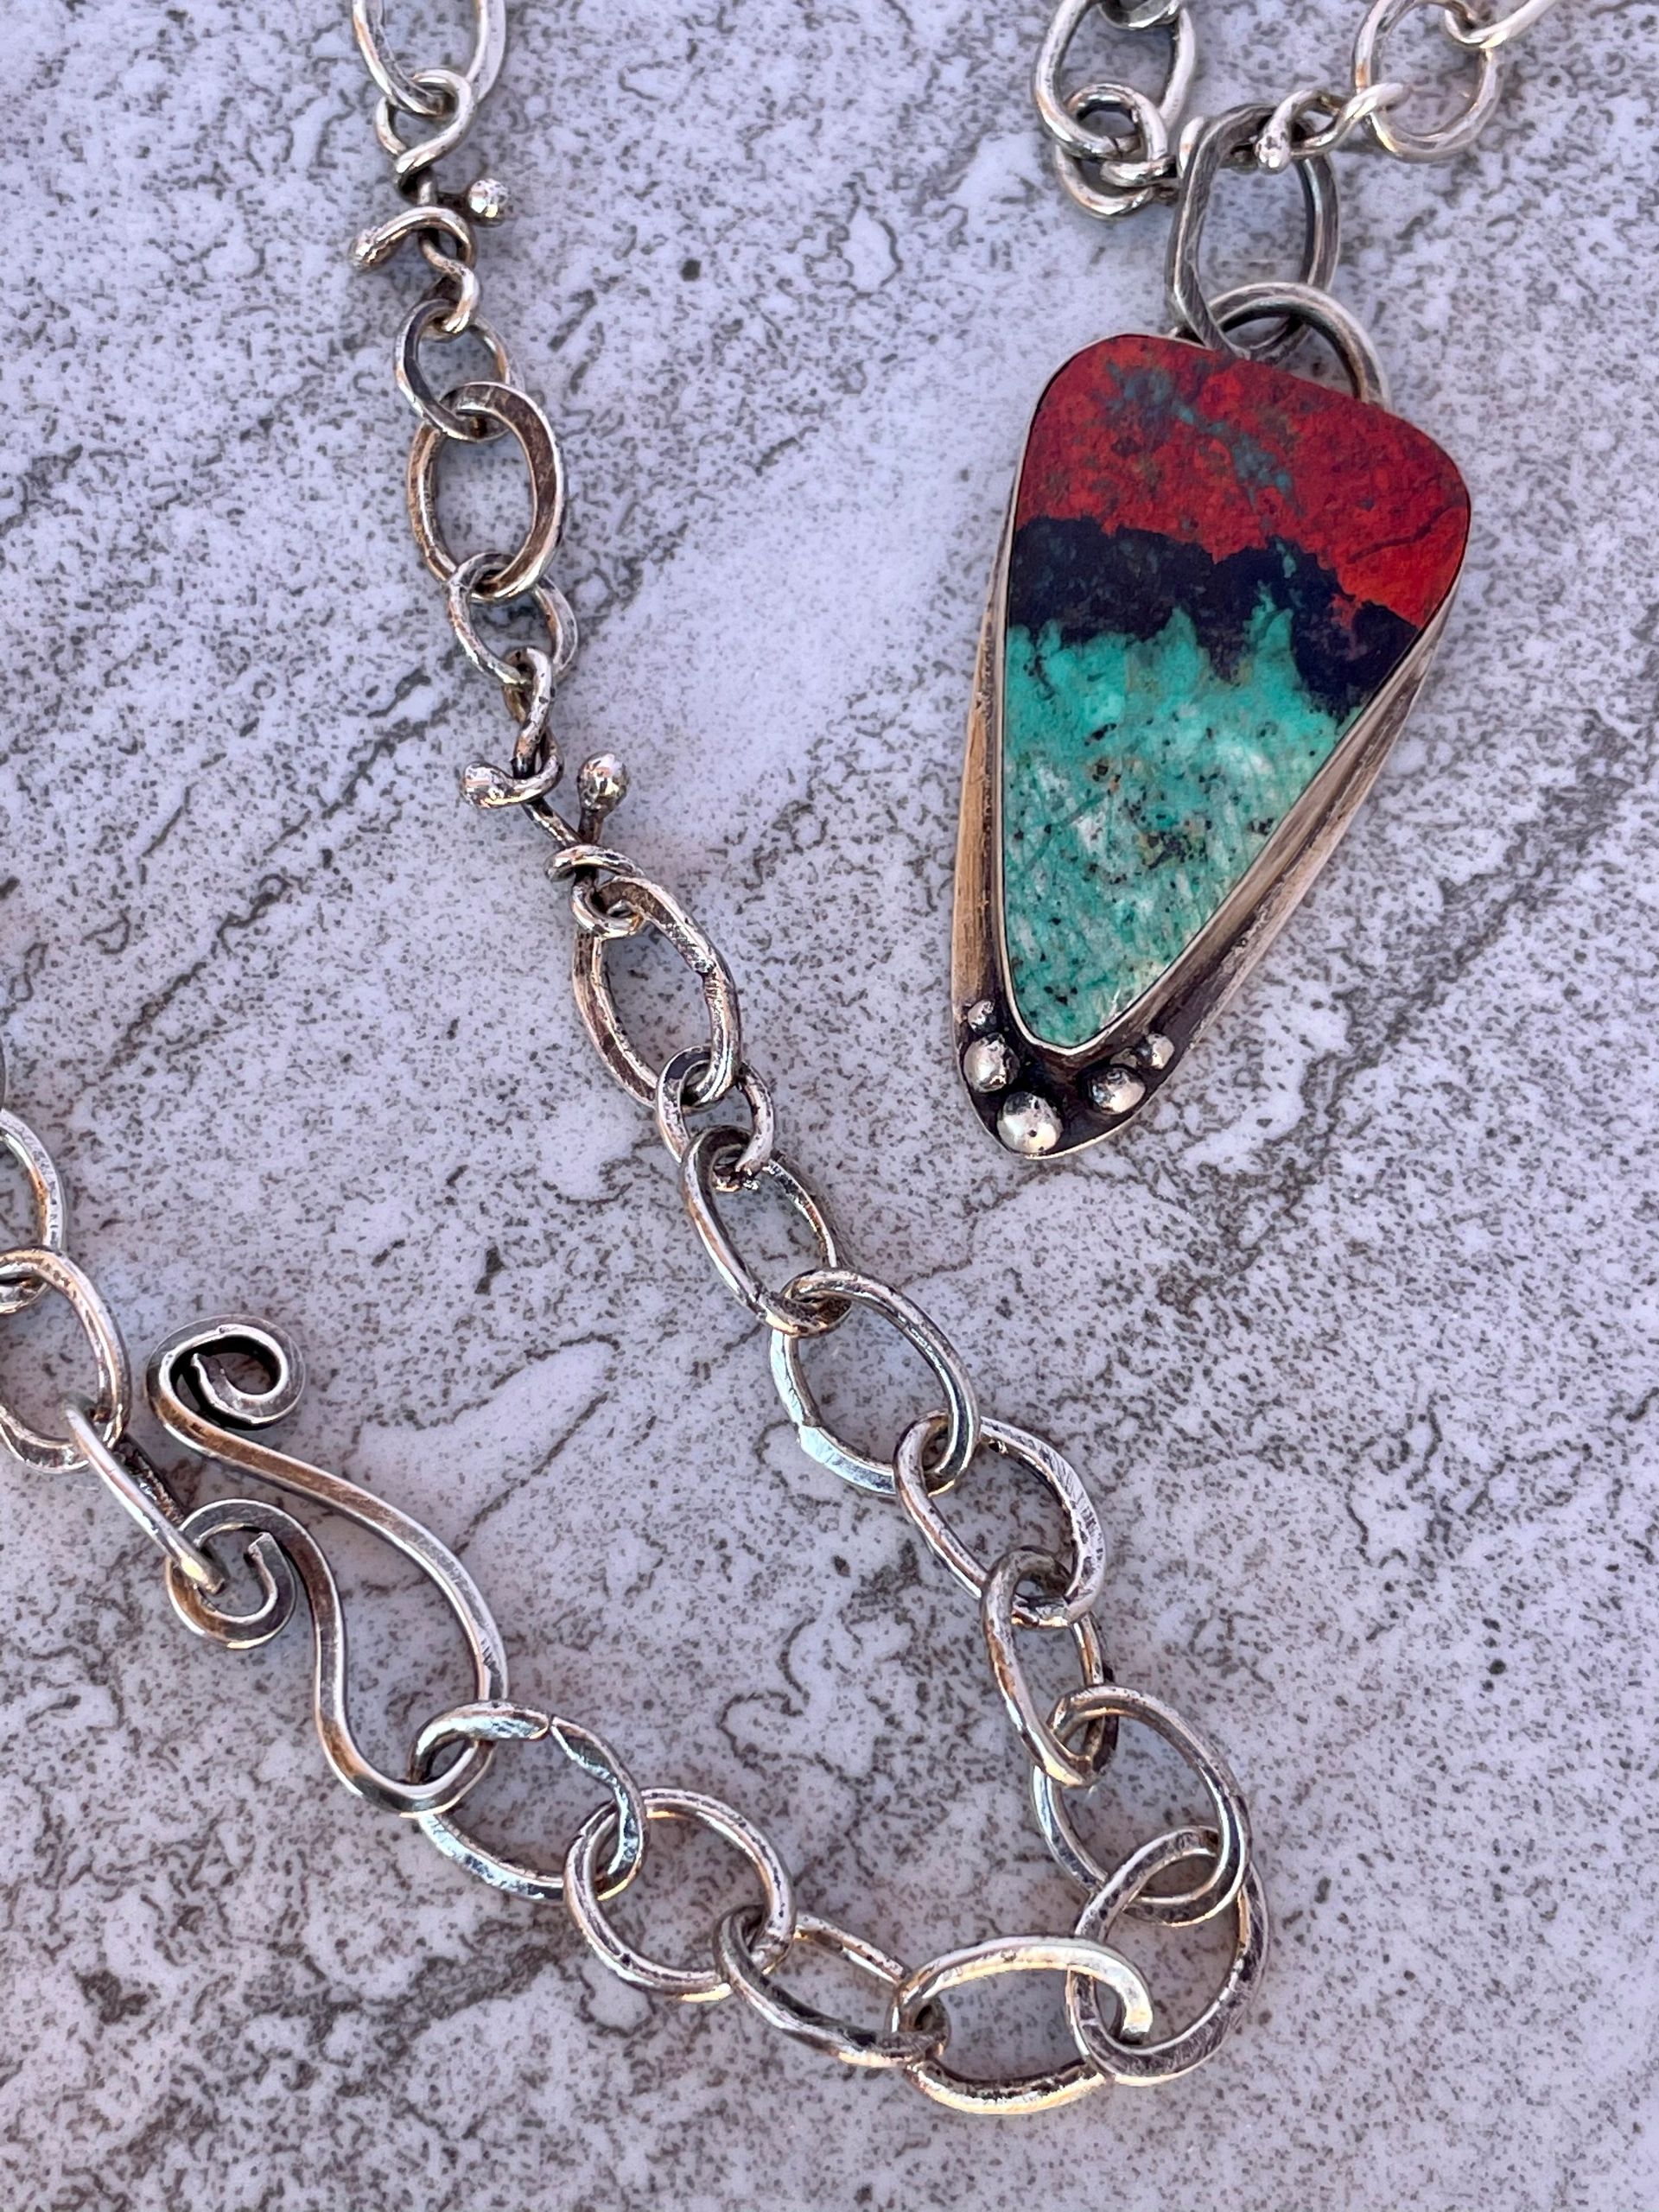 Sonoran sunset stone set in sterling silver with completed hand wrought chain. 